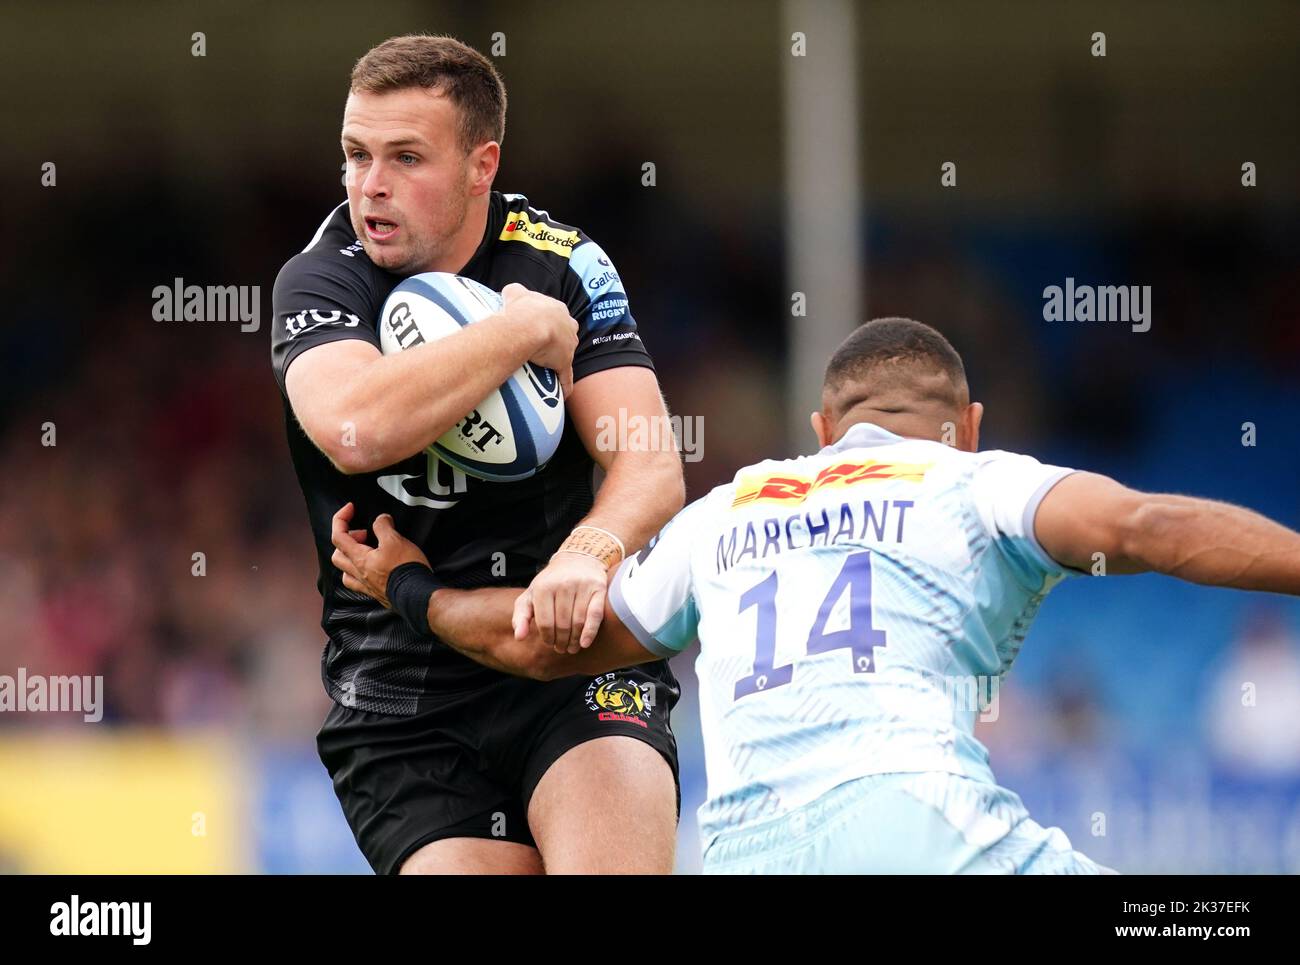 Exeter Chiefs' Joe Simmonds (left) is tackled by Harlequins' Tyrone Green Joe Marchant during the Gallagher Premiership match at Sandy Park, Exeter. Picture date: Sunday September 25, 2022. Stock Photo